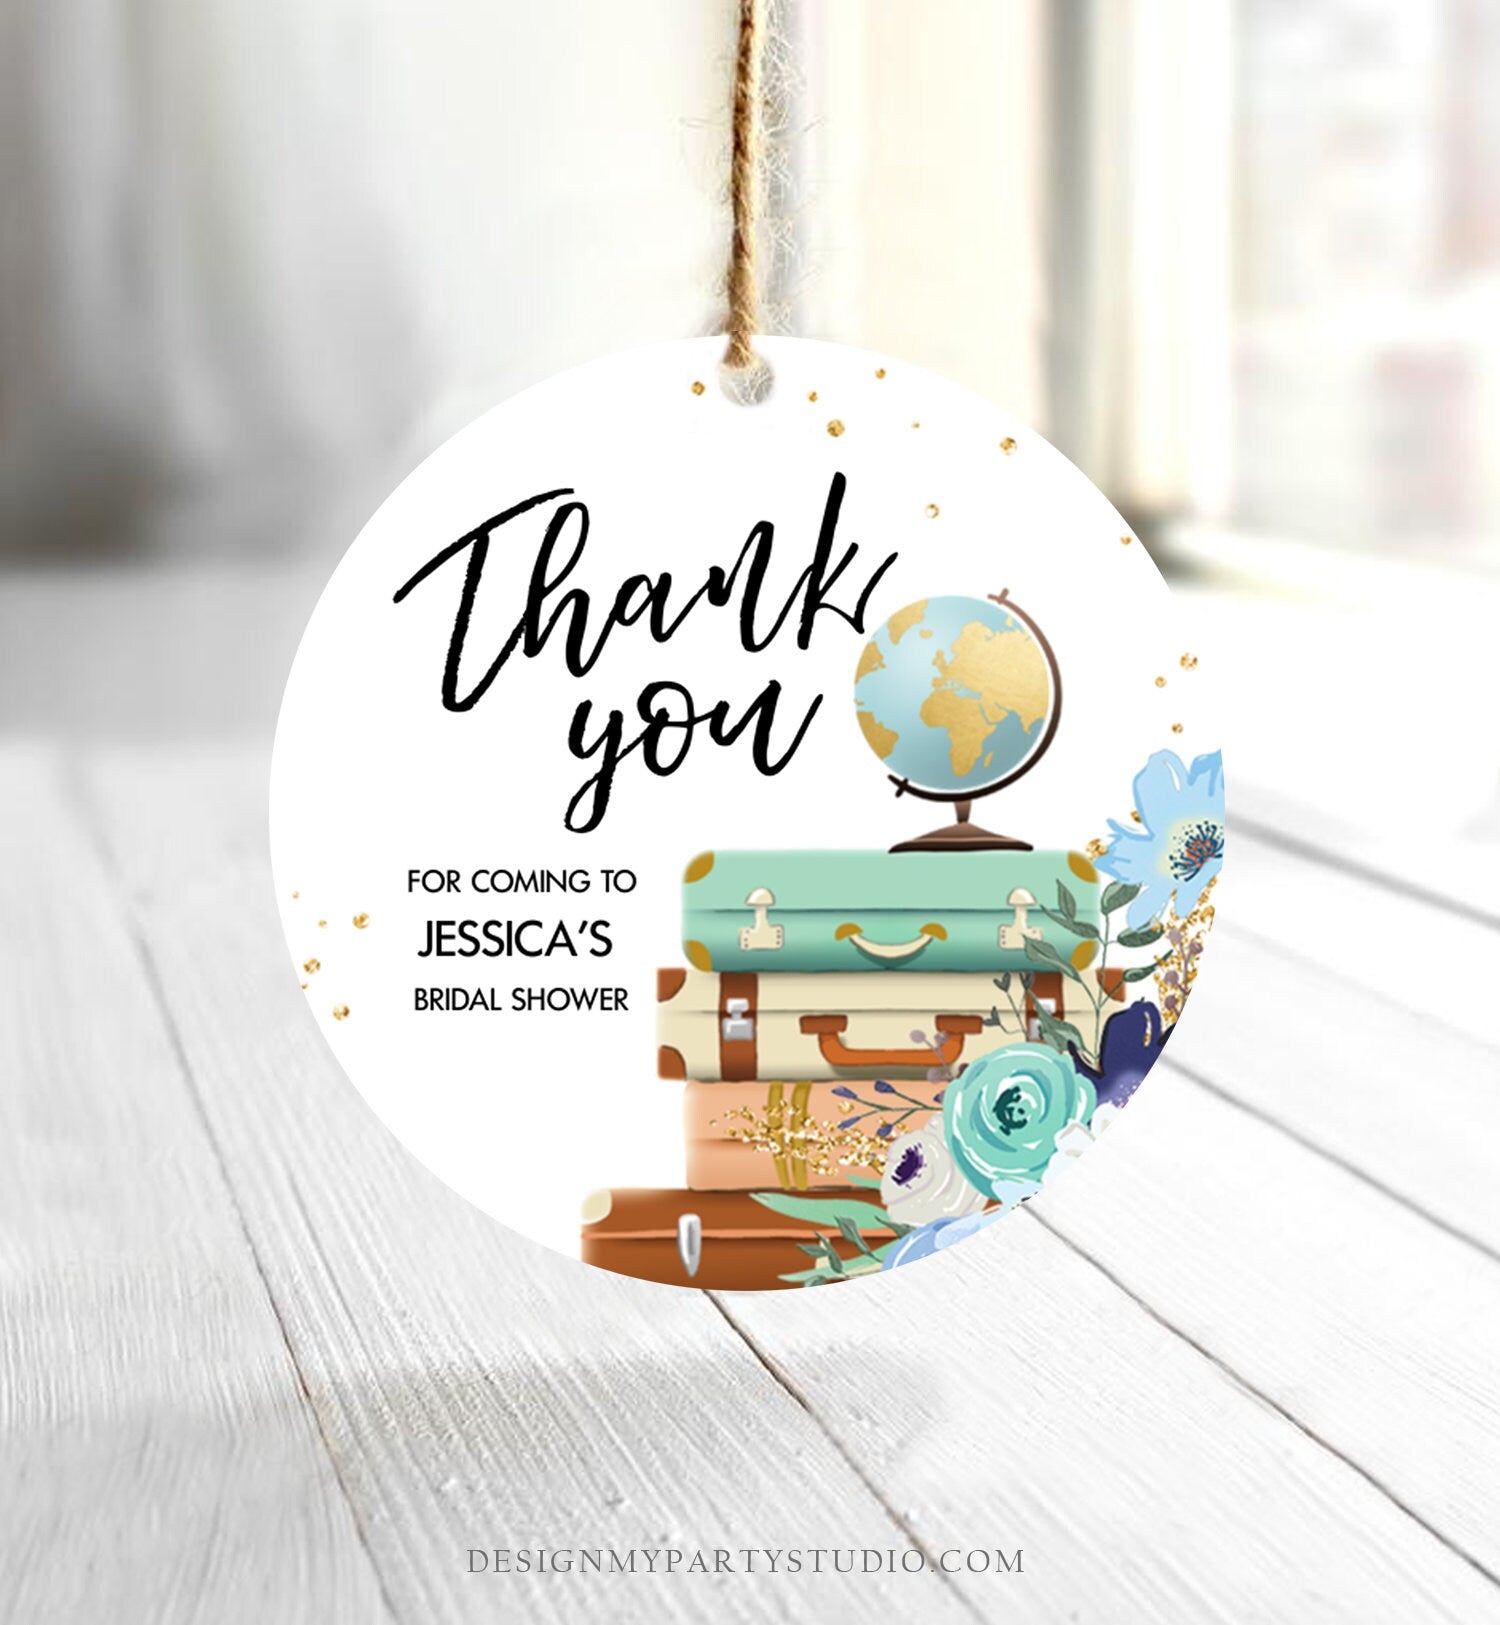 Editable Travel Favor Tag Thank You Gift Tag Adventure Bridal Shower Blue Floral Gold Round Square Stickers Corjl Template Printable 0030